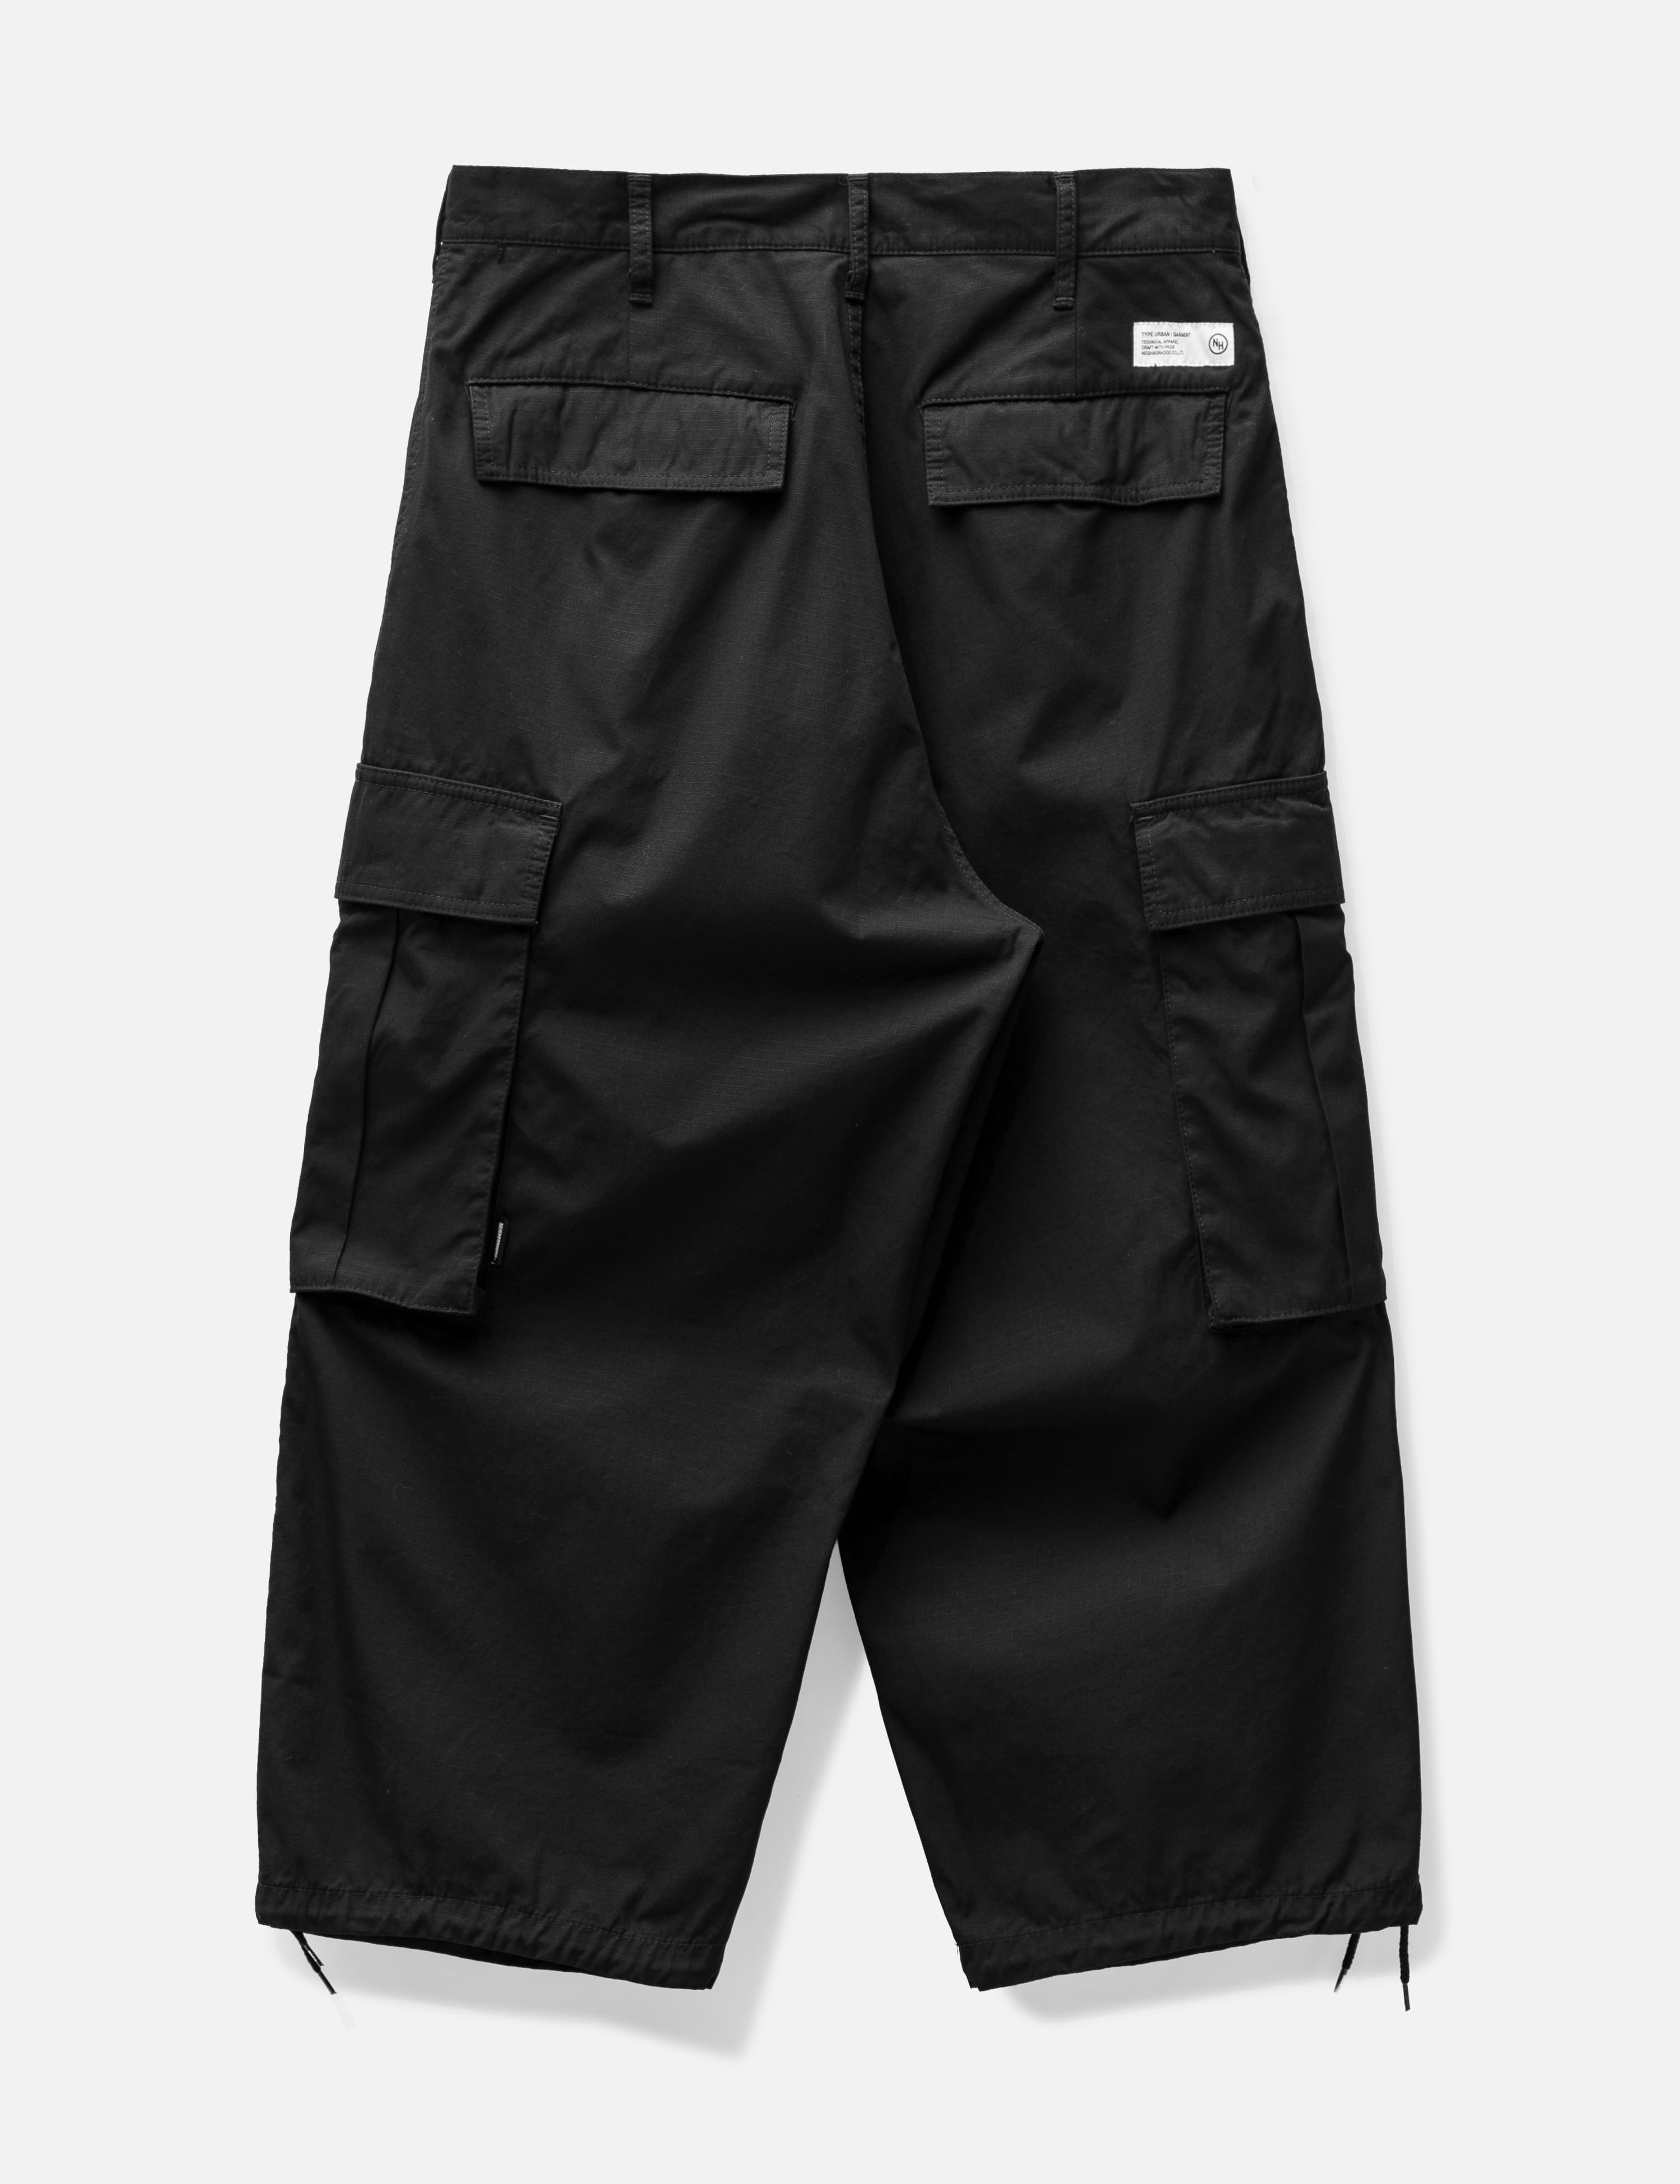 Buy cargo half pant in India @ Limeroad